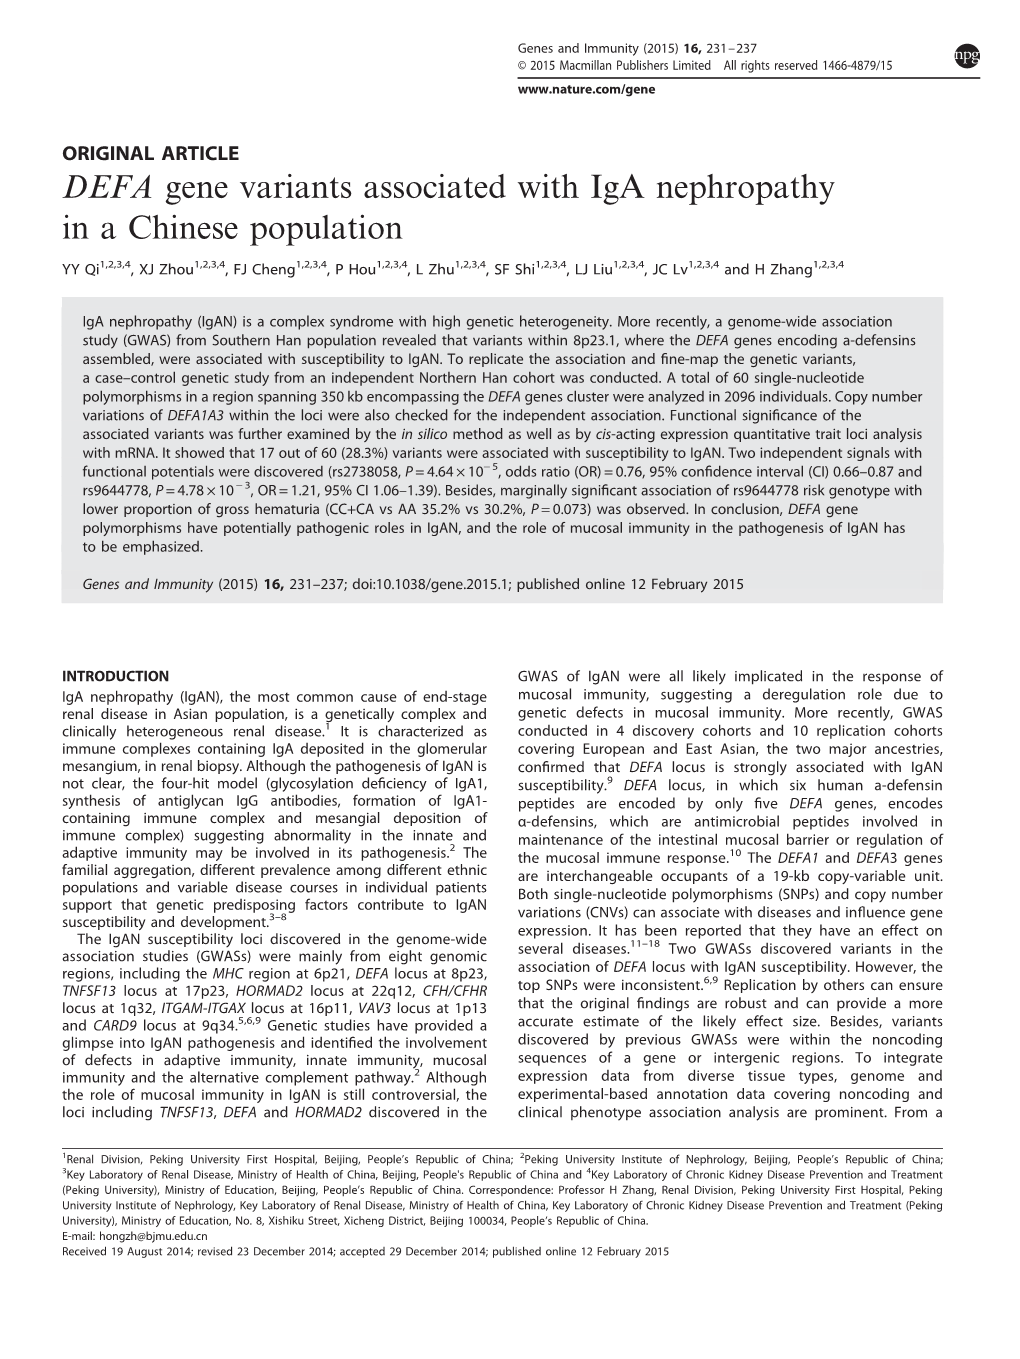 DEFA Gene Variants Associated with Iga Nephropathy in a Chinese Population